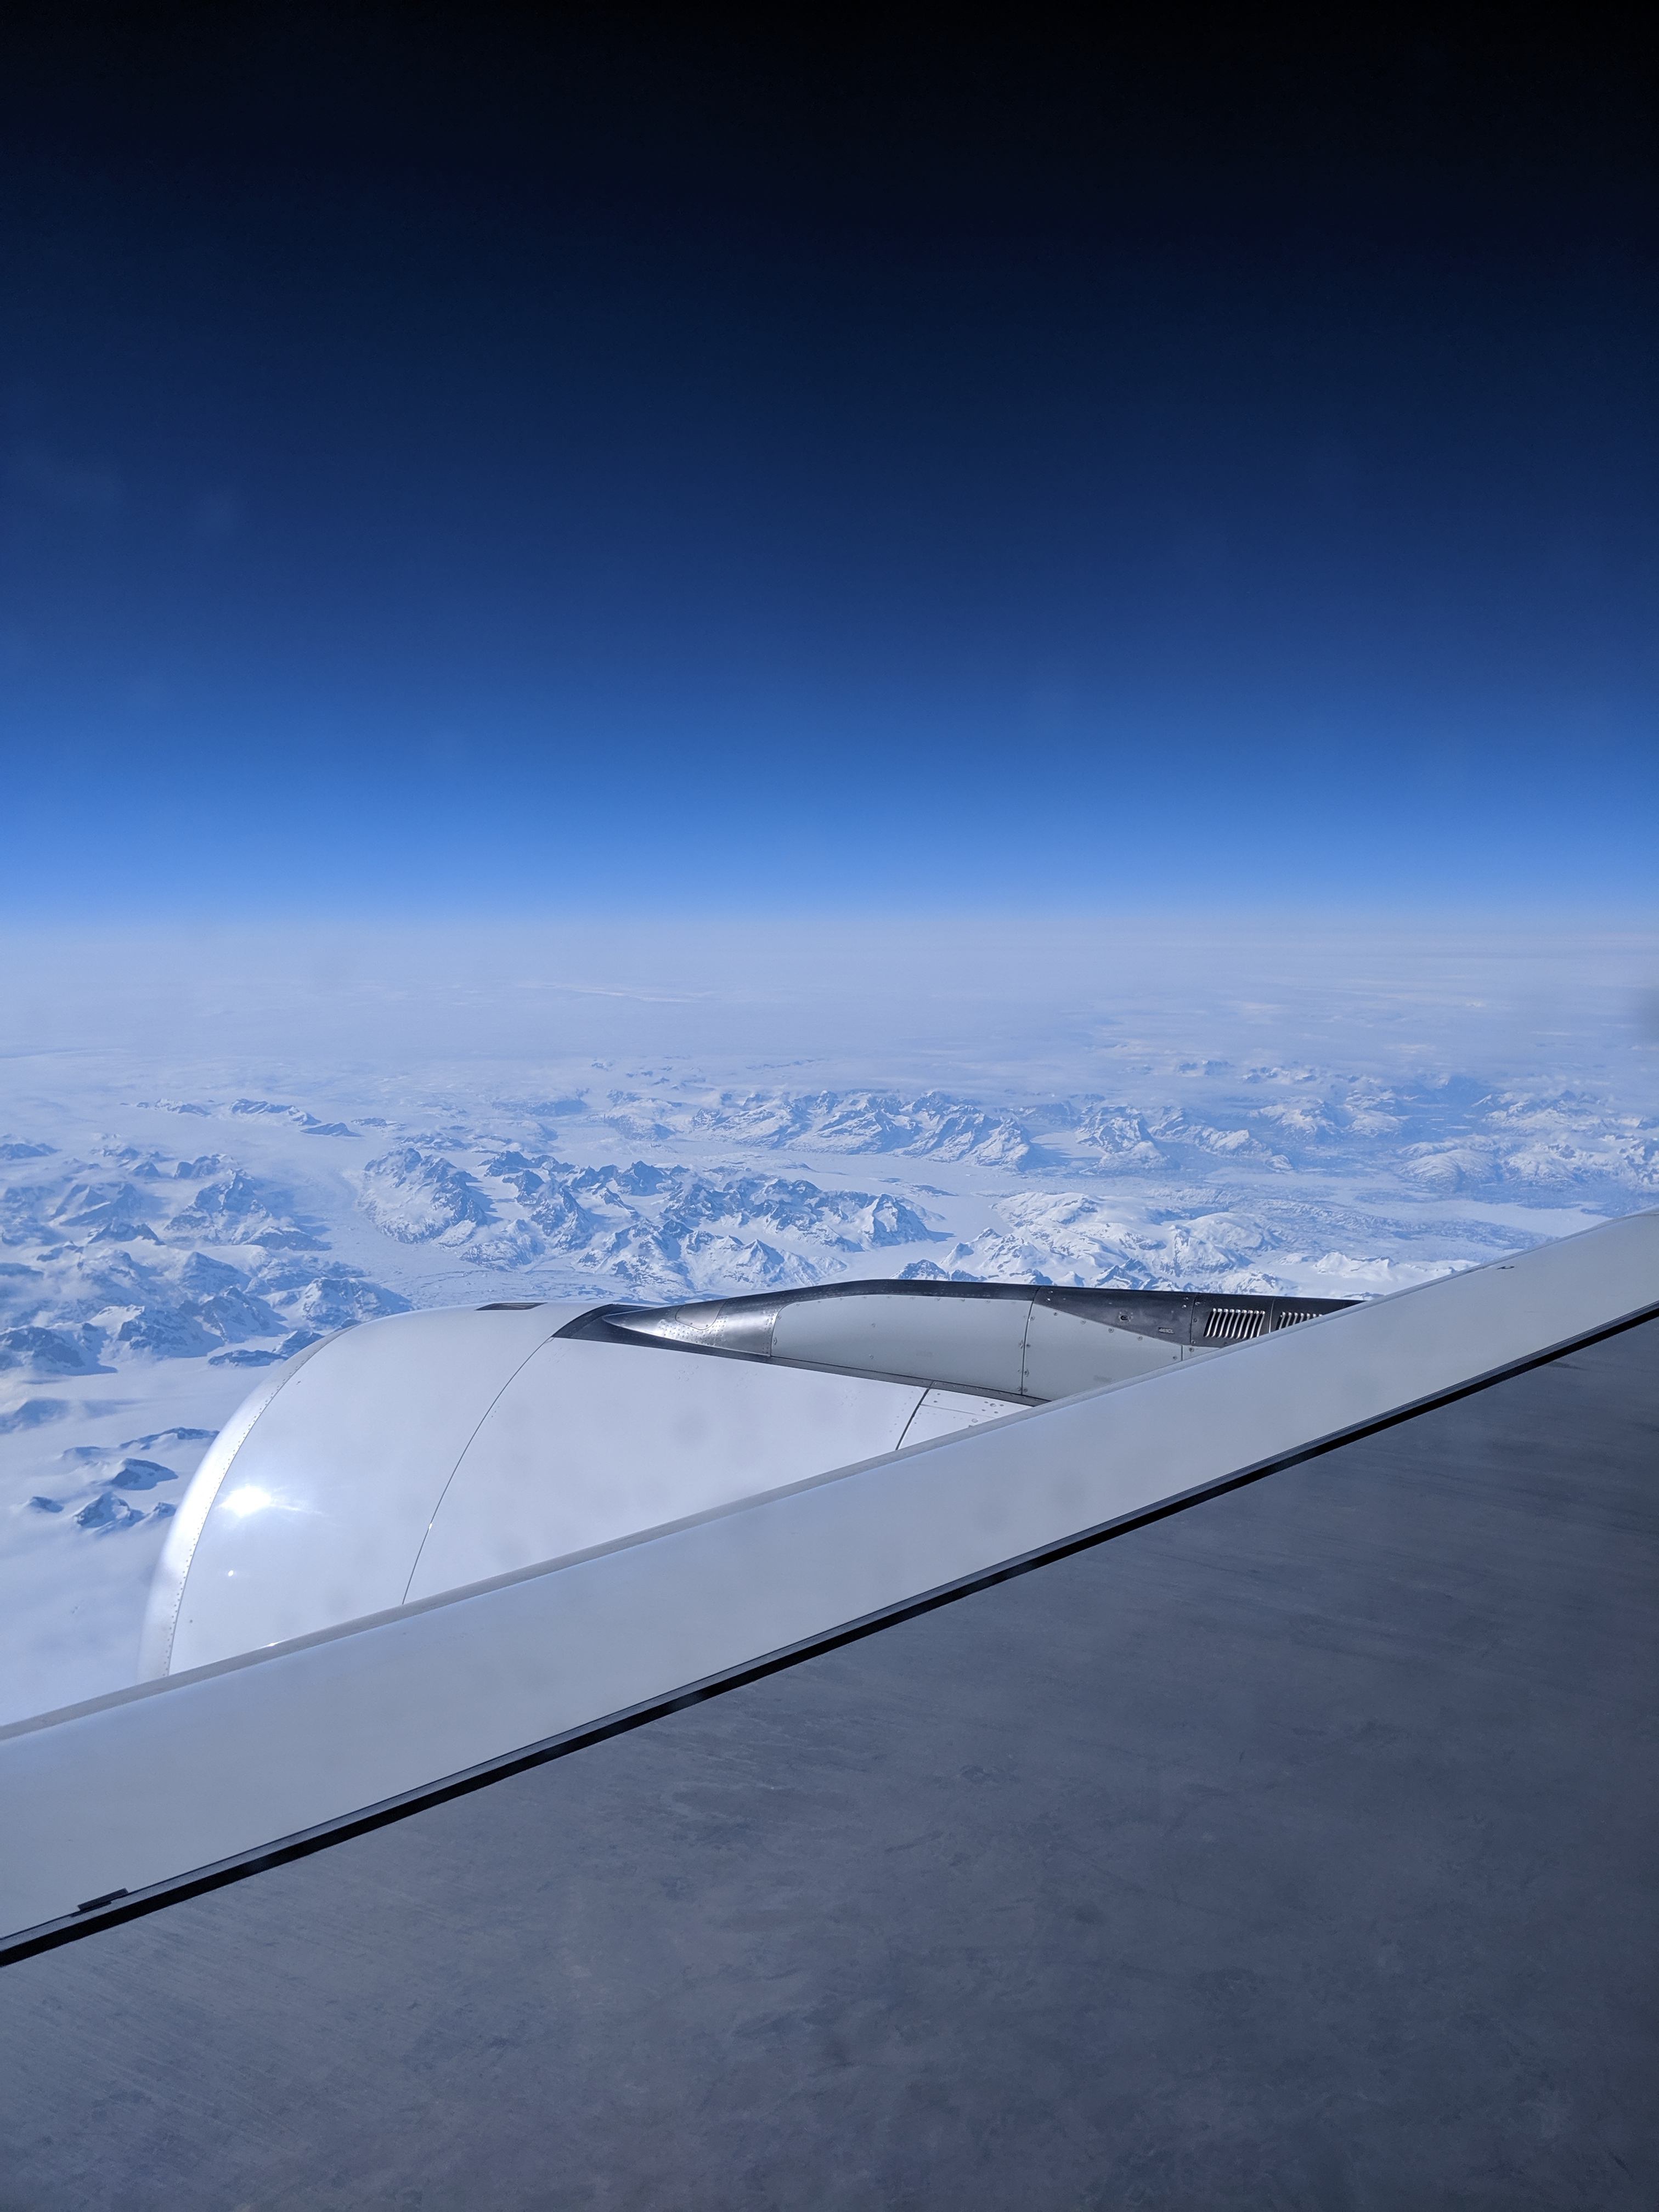 A view over the plane wing of Greenland